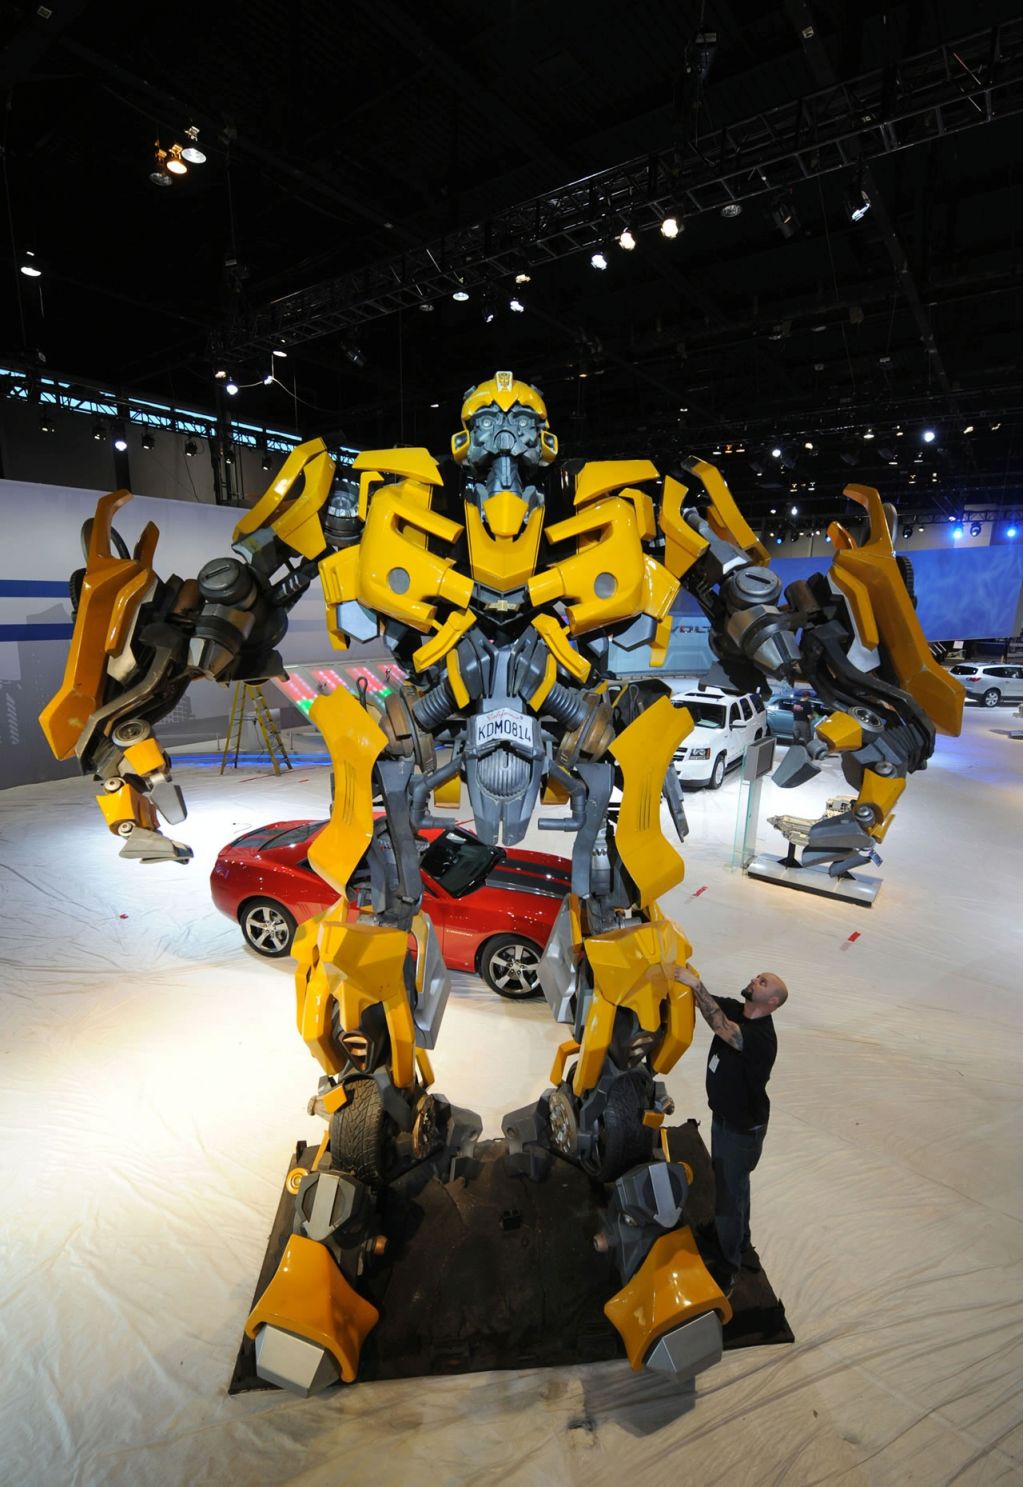 Autobot Bumblebee from Transformers: Revenge of the Fallen